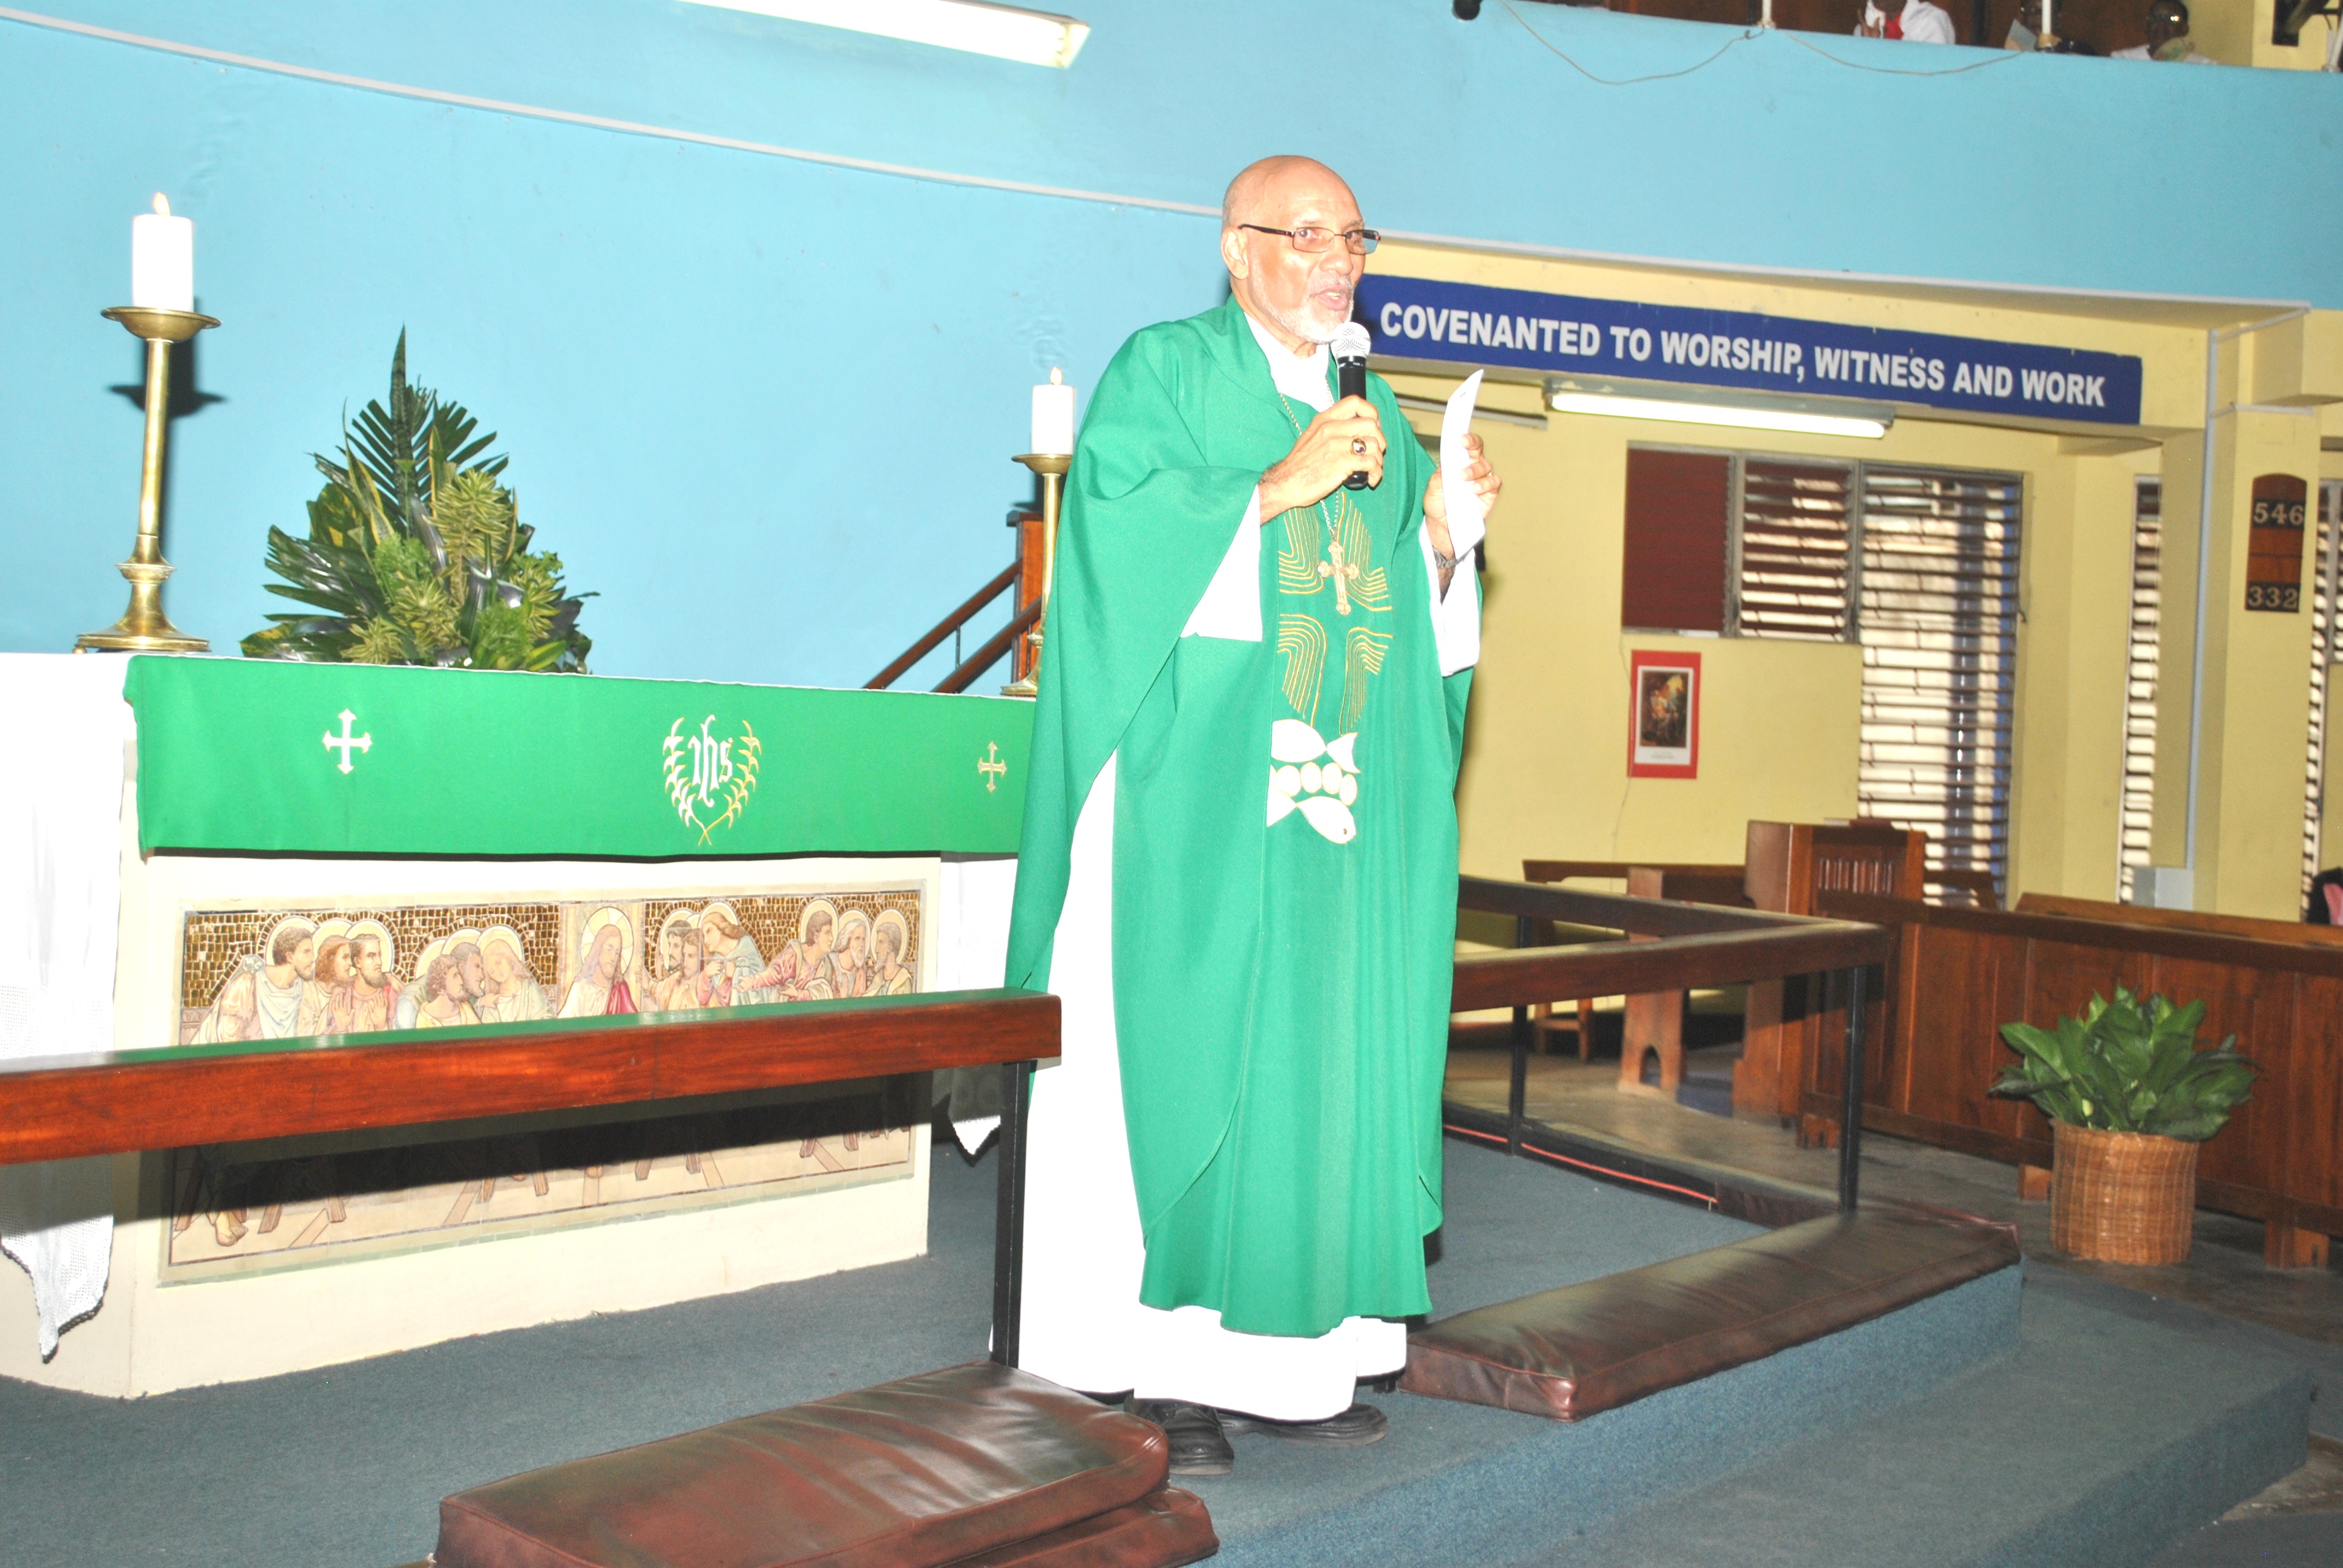 Sermon preached by The Rt. Rev. Howard Gregory, Bishop of Jamaica & The Cayman Islands at the Choir Workshop Closing Eucharist held at  St. Luke’s Church, Cross Roads, on July 19, 2015